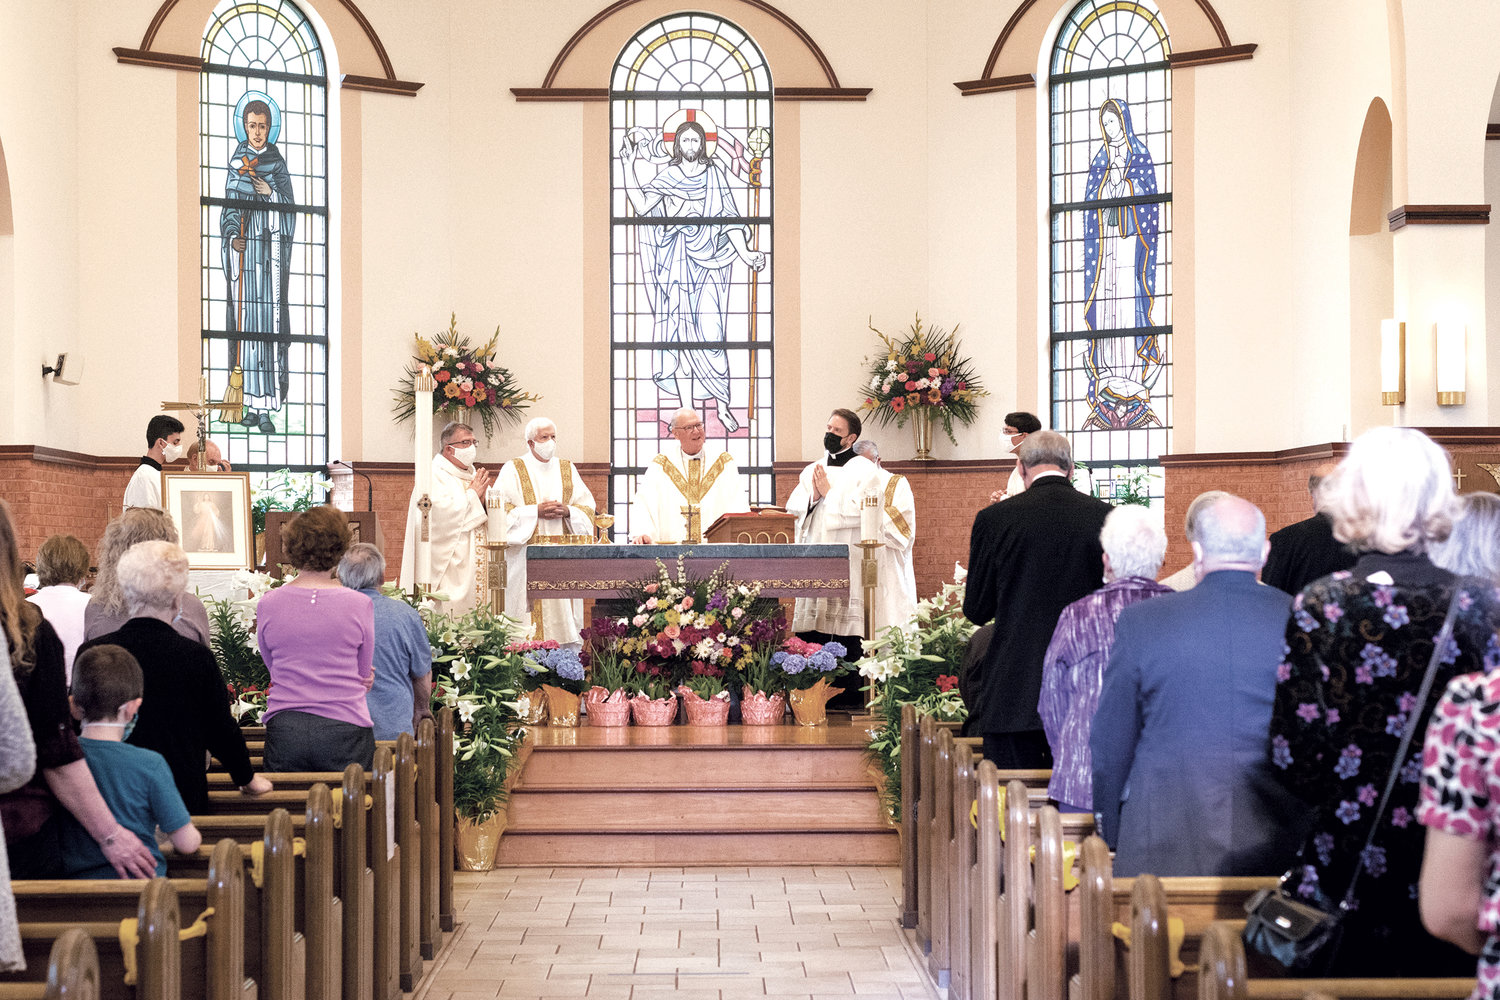 Cardinal Dolan celebrates Mass during a regional reception for Cardinal’s Annual Stewardship Appeal donors from the archdiocese’s northern counties April 10 at St. Martin de Porres Church in Poughkeepsie. Father Matthew Furey is the pastor of St. Martin de Porres.